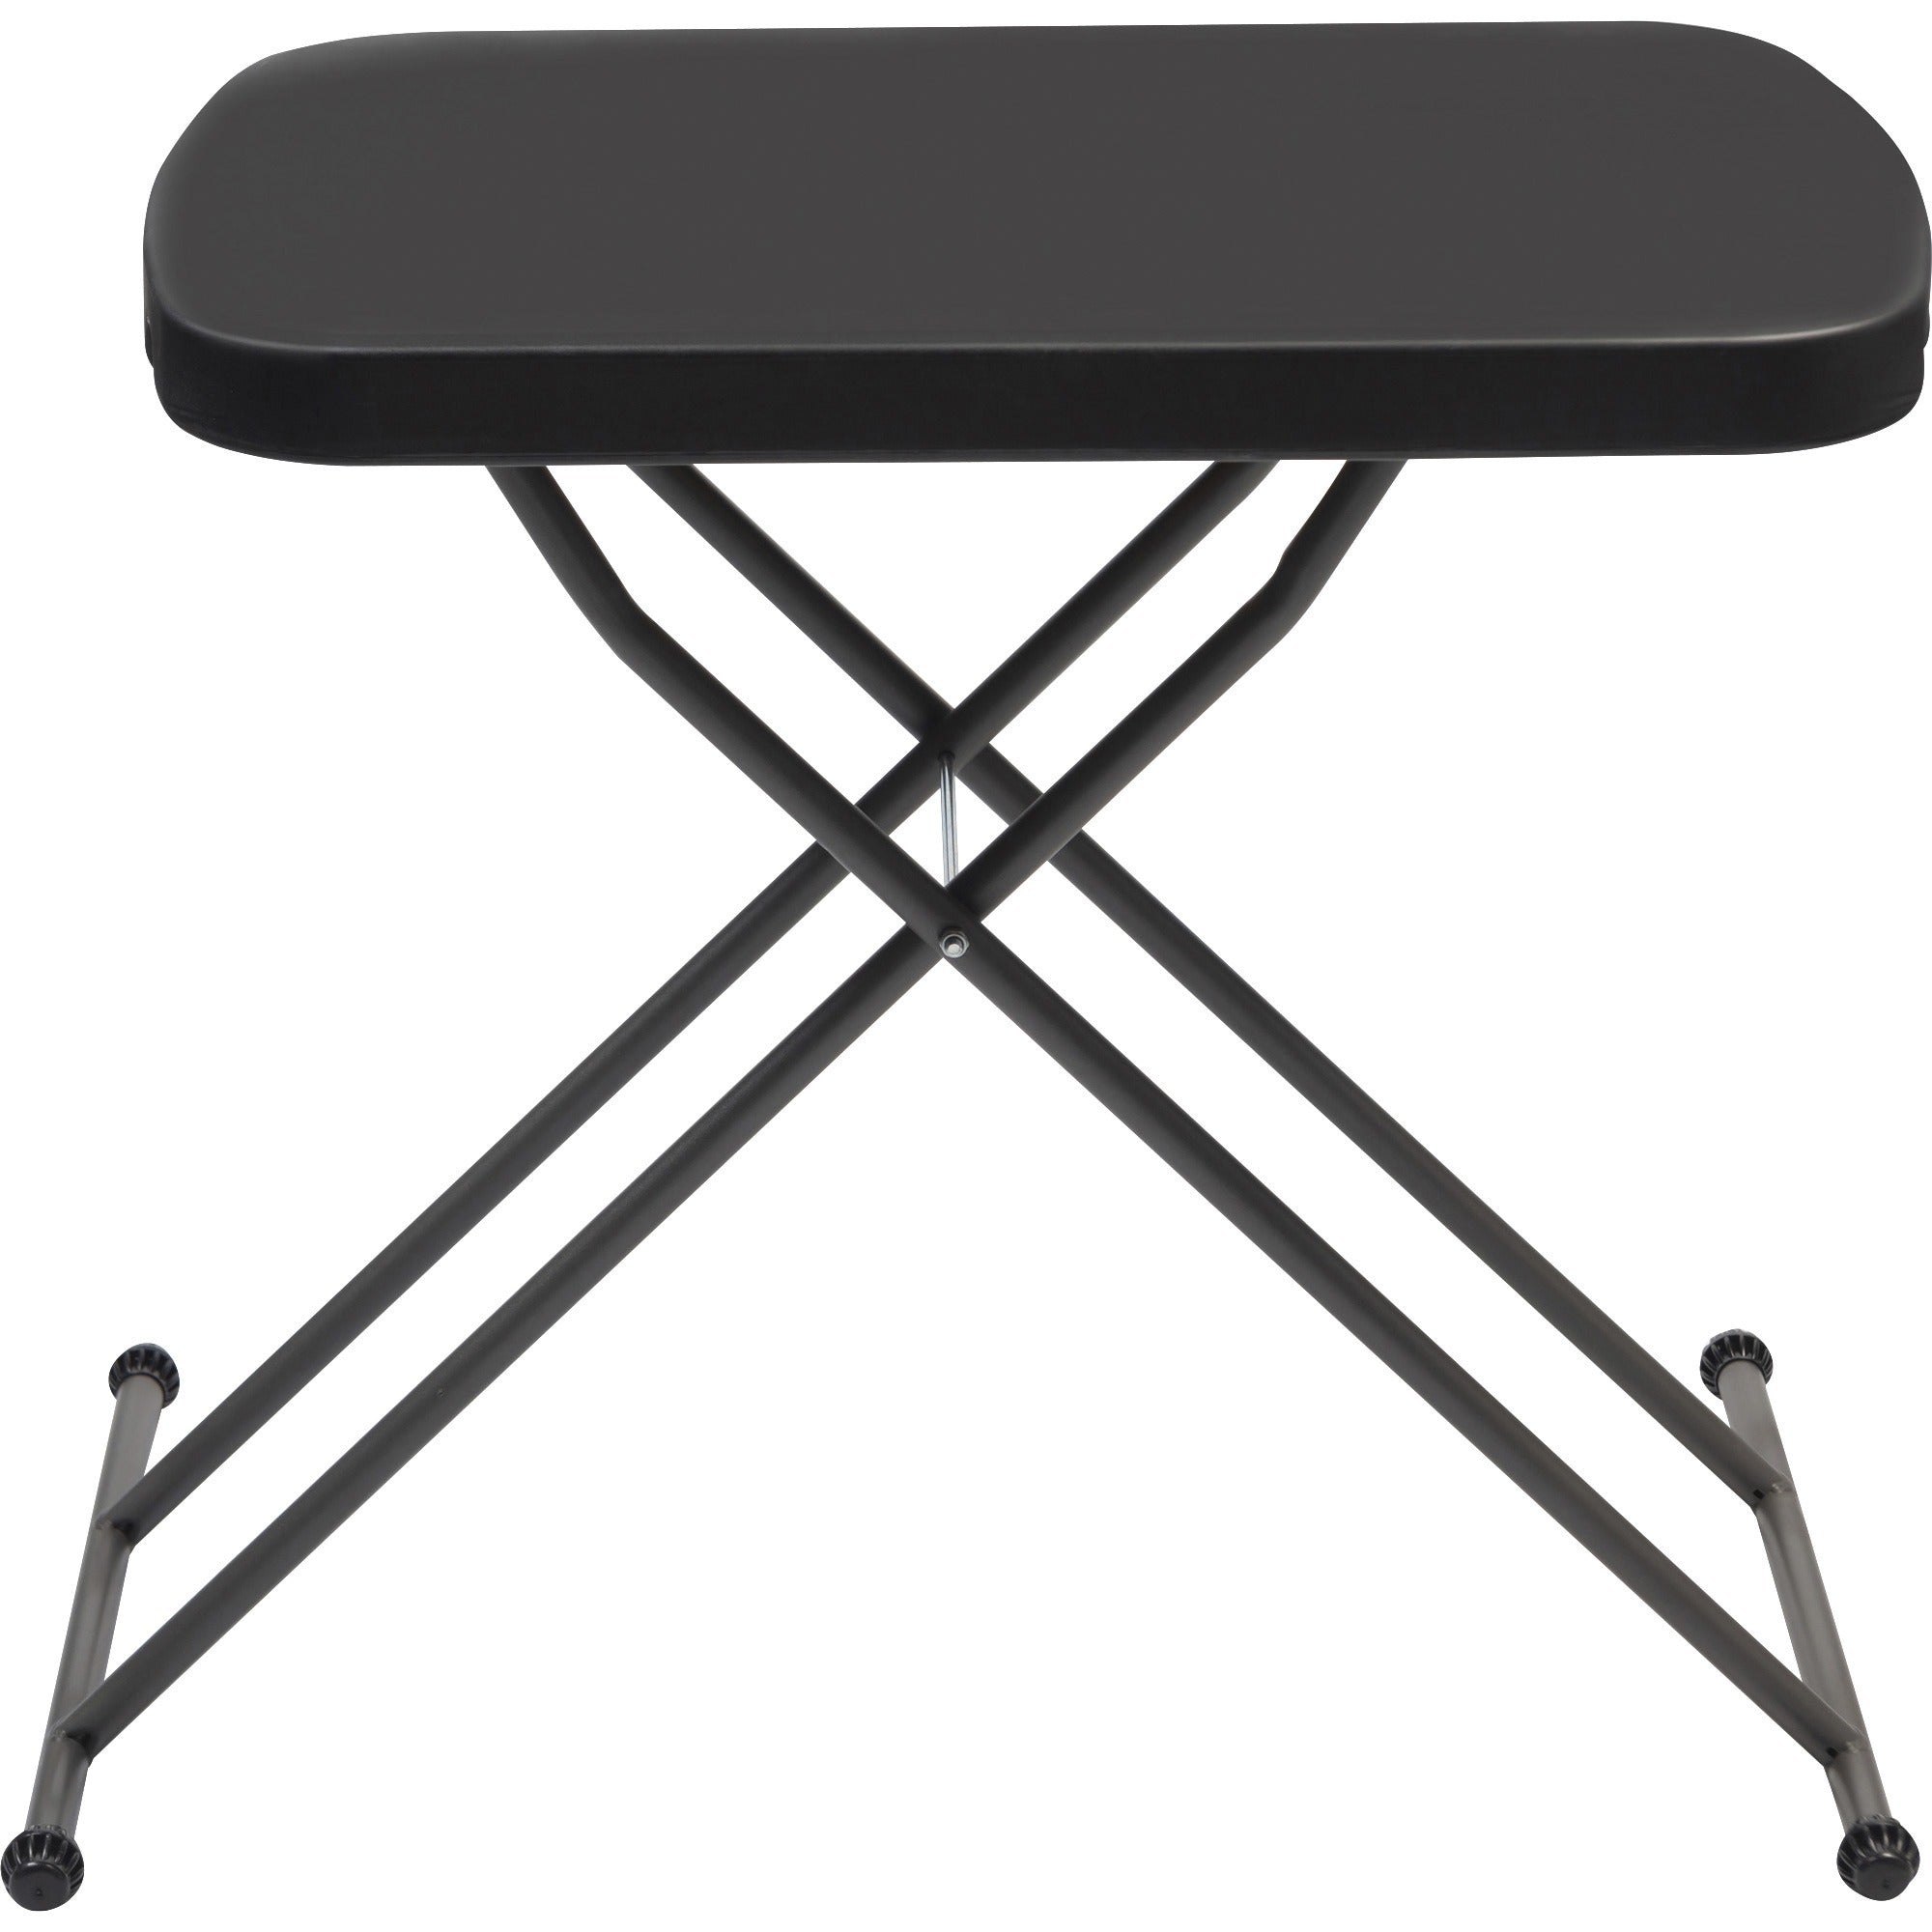 iceberg-indestructable-small-space-personal-table-for-table-topblack-top-25-lb-capacity-adjustable-height-2080-to-2660-adjustment-x-2660-table-top-width-x-1780-table-top-depth-2660-height-high-density-polyethylene-hdpe-resi_ice65498 - 2